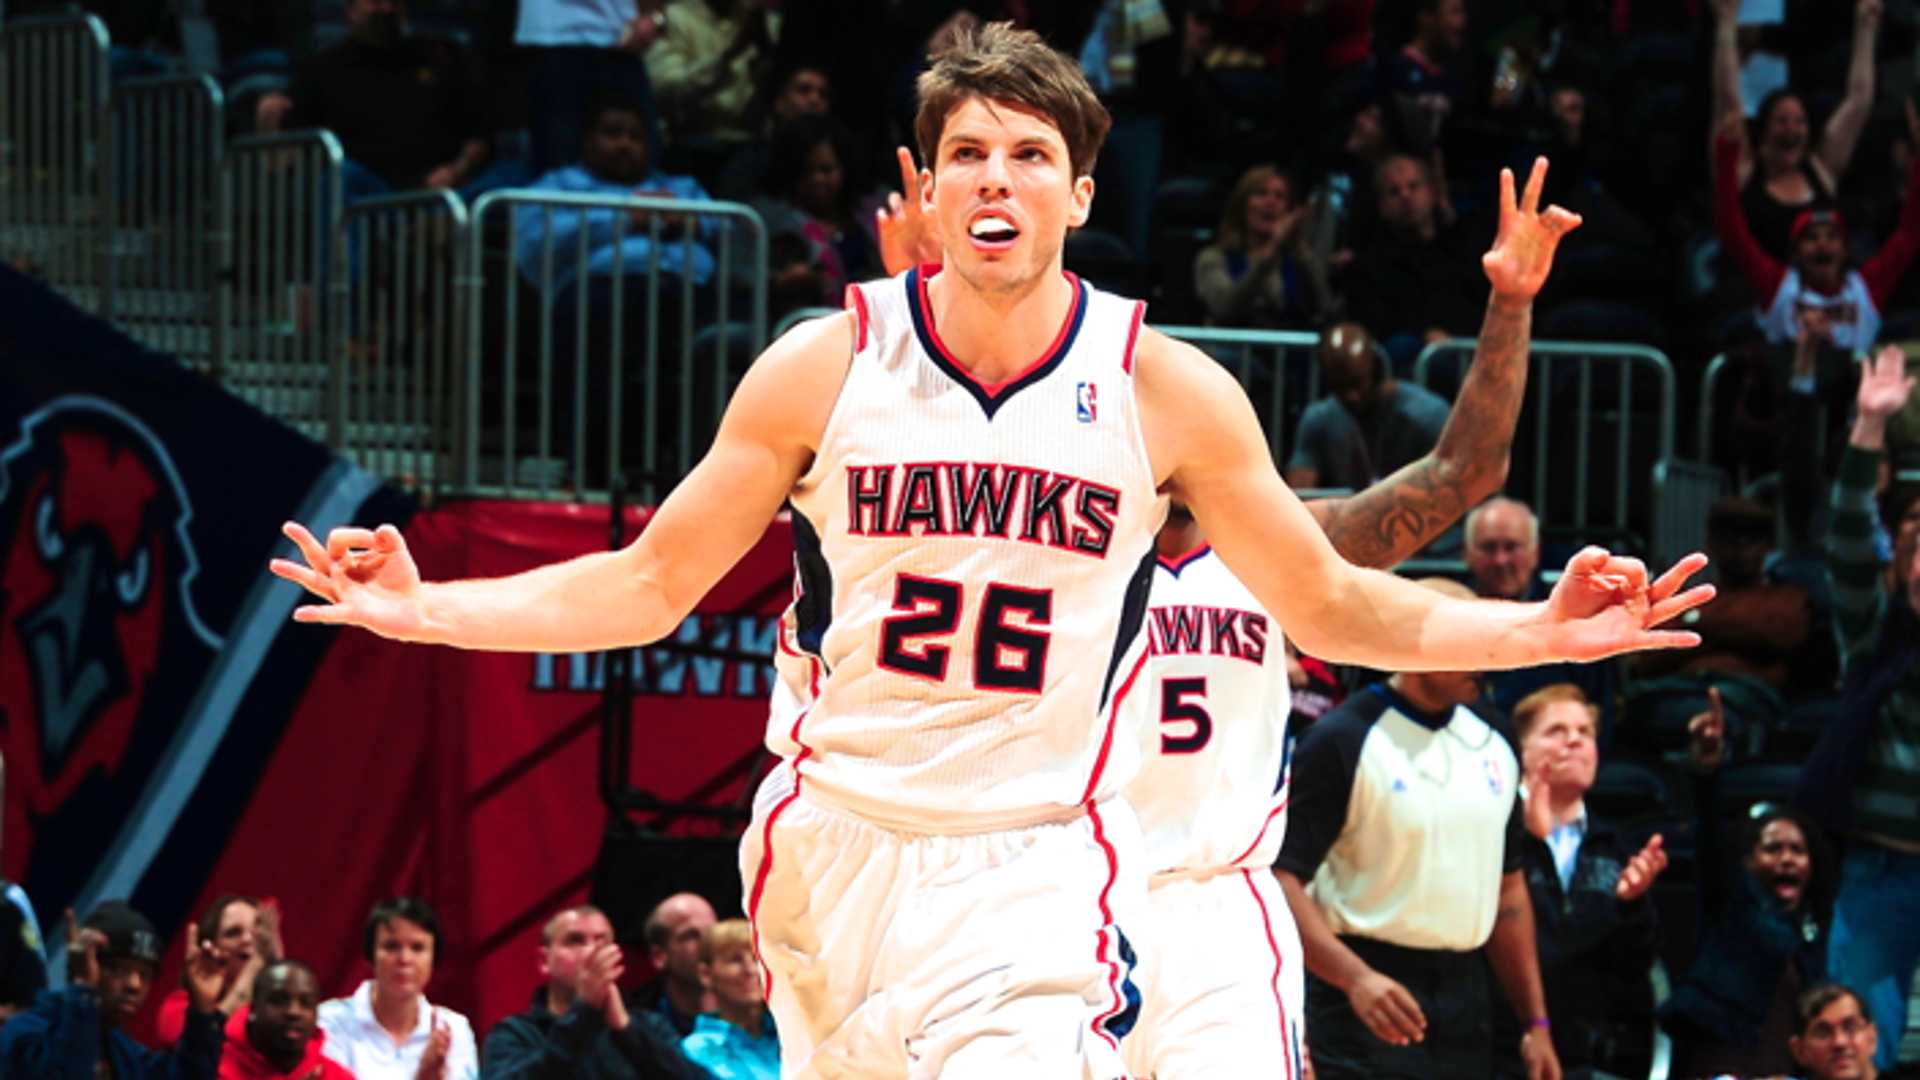 Kyle Korver in a file photo. (Image credits: twitter)